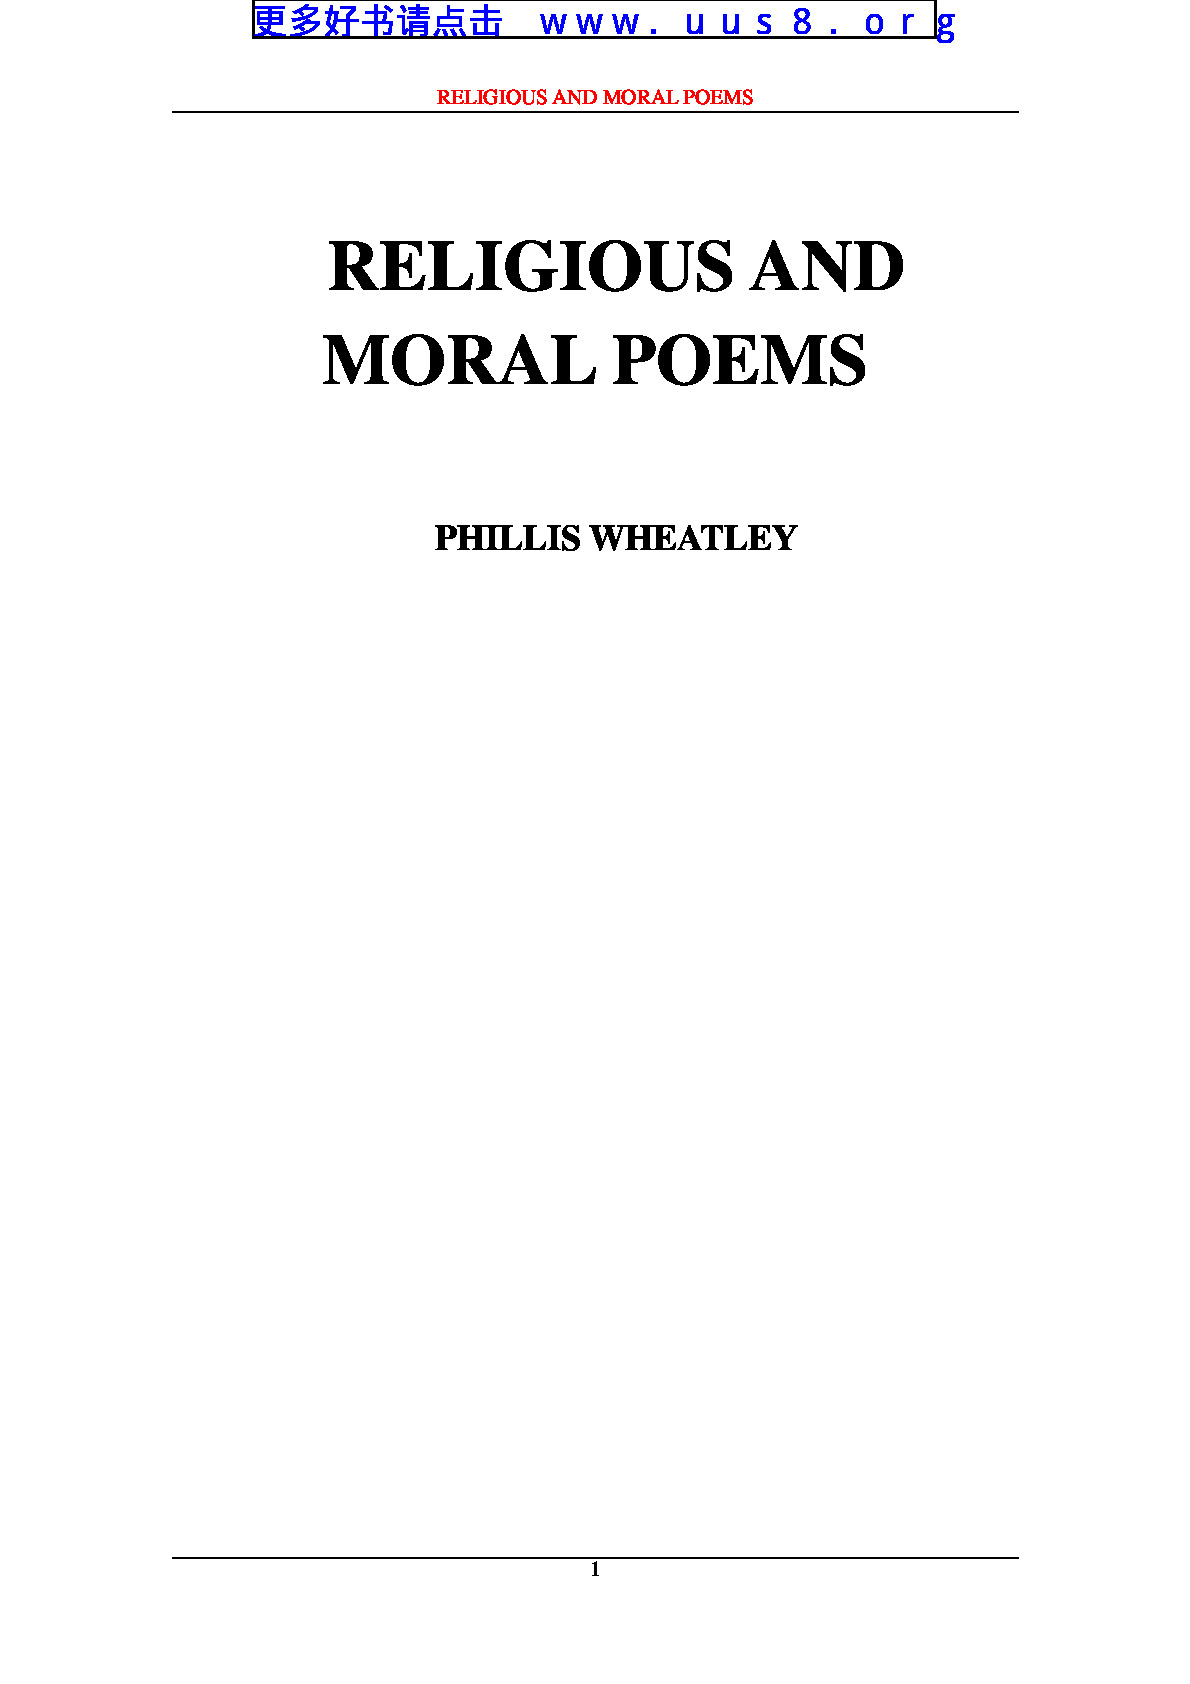 Religious_and_Moral_Poems(宗教与道德诗)